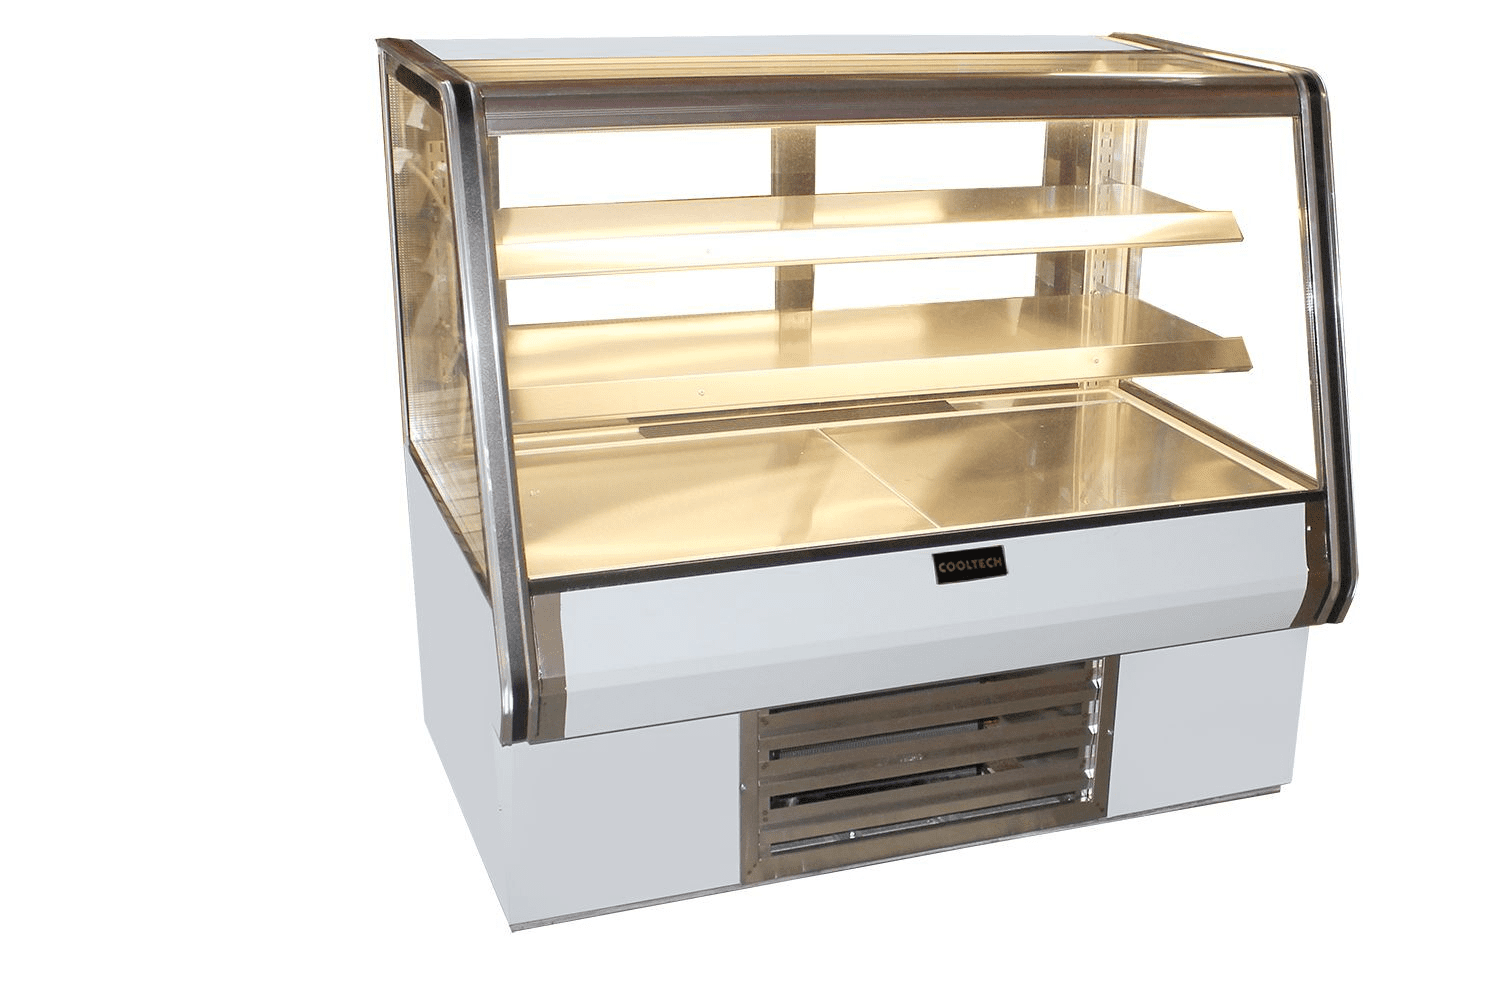 A Cooltech Counter Bakery Pastry Display Case 48” with glass windows and stainless steel trim, featuring multiple shelves and a heating system underneath.